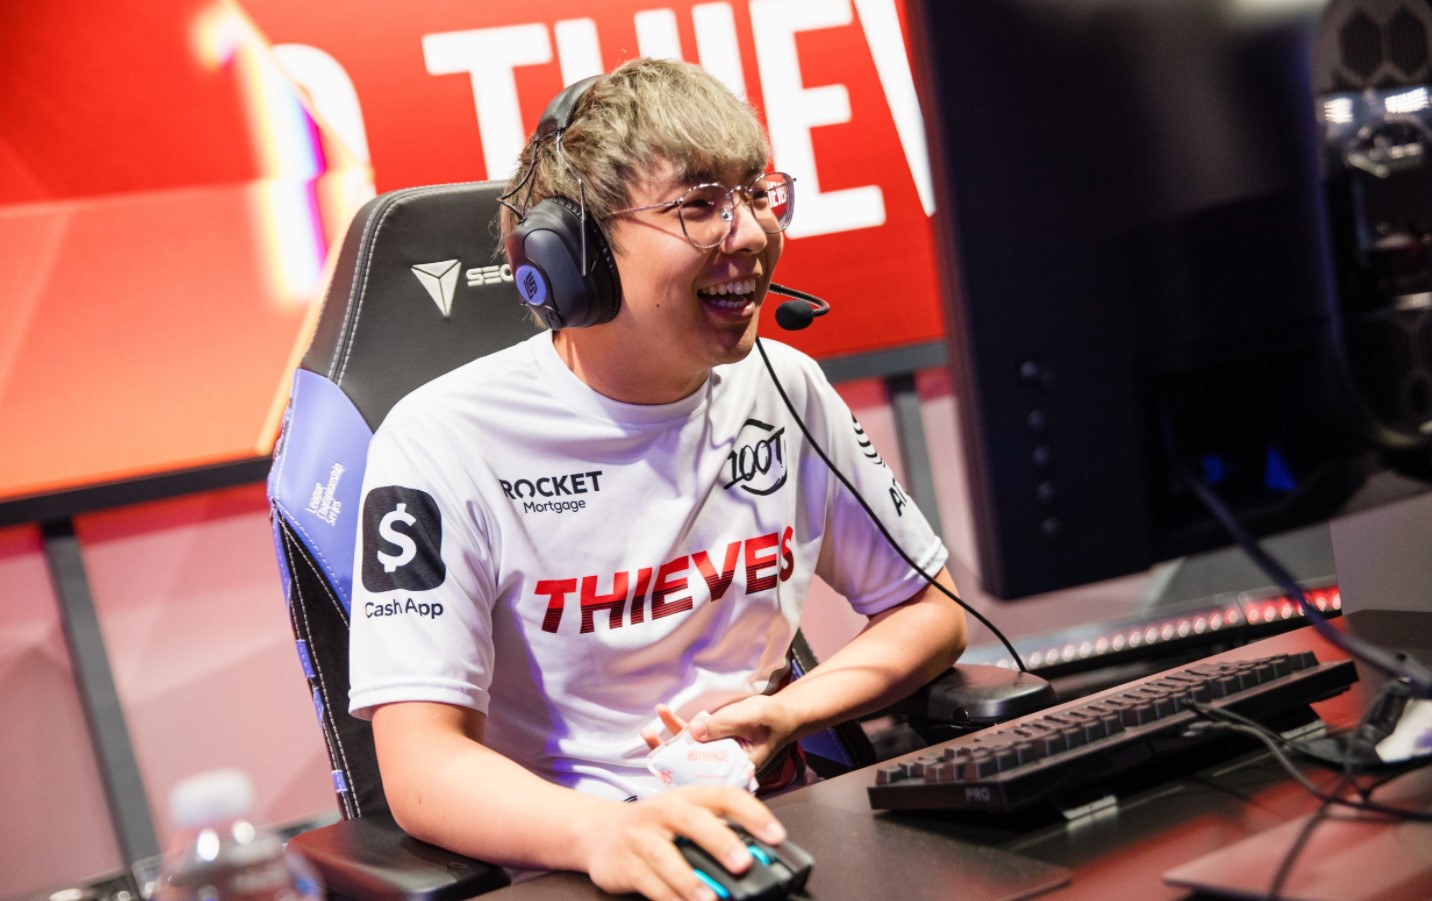 100 Thieves aim to pull off their biggest heist yet at Worlds 2021 - Dot  Esports